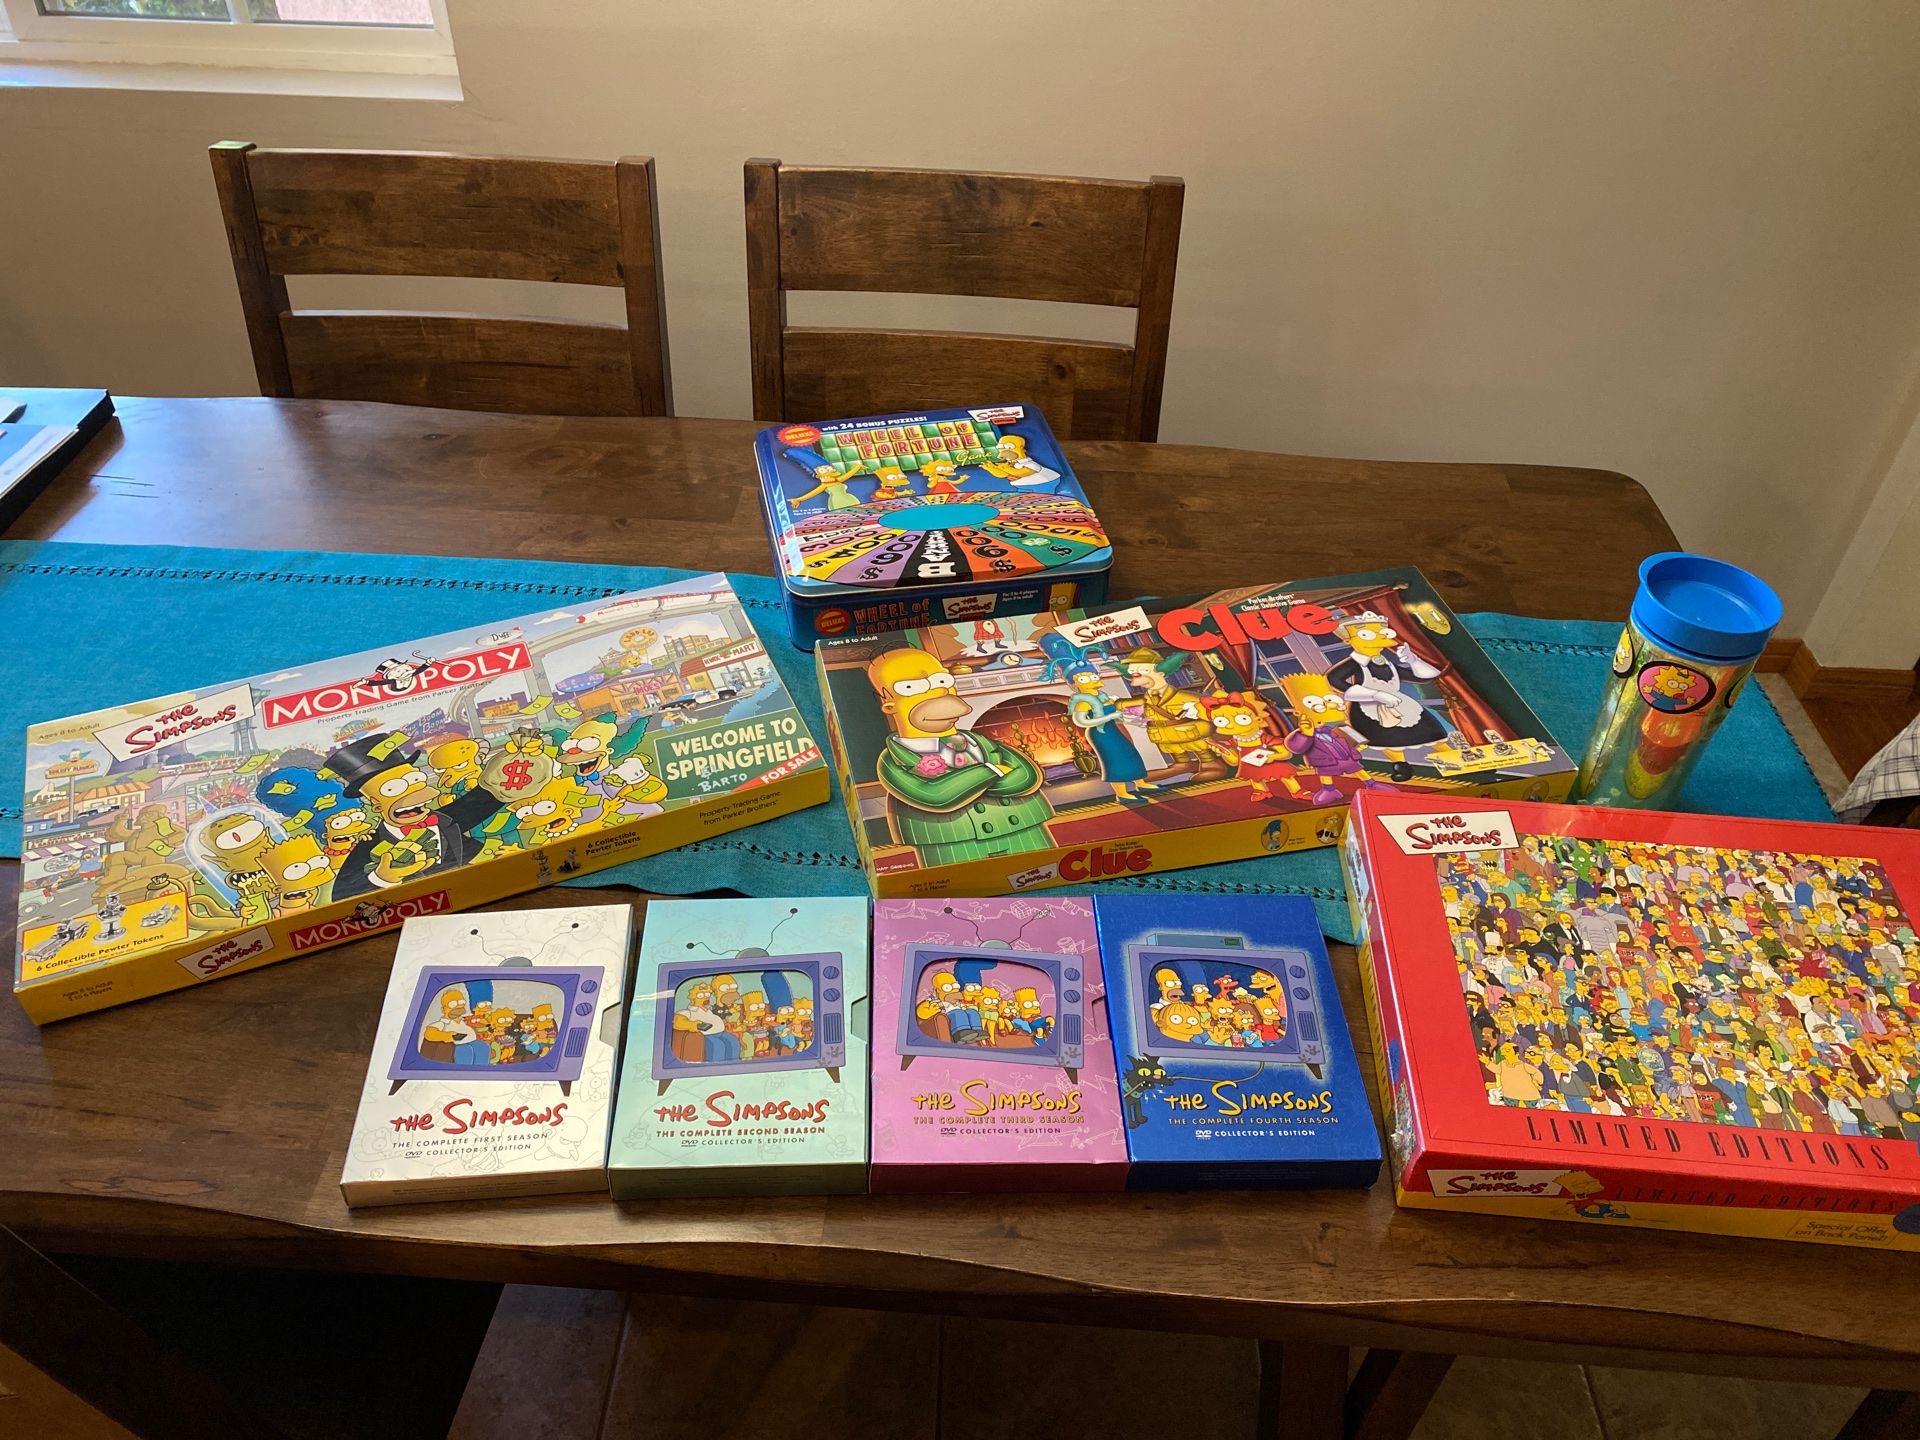 4 Simpson’s games, 4DVDs, Watch, and puzzle collection